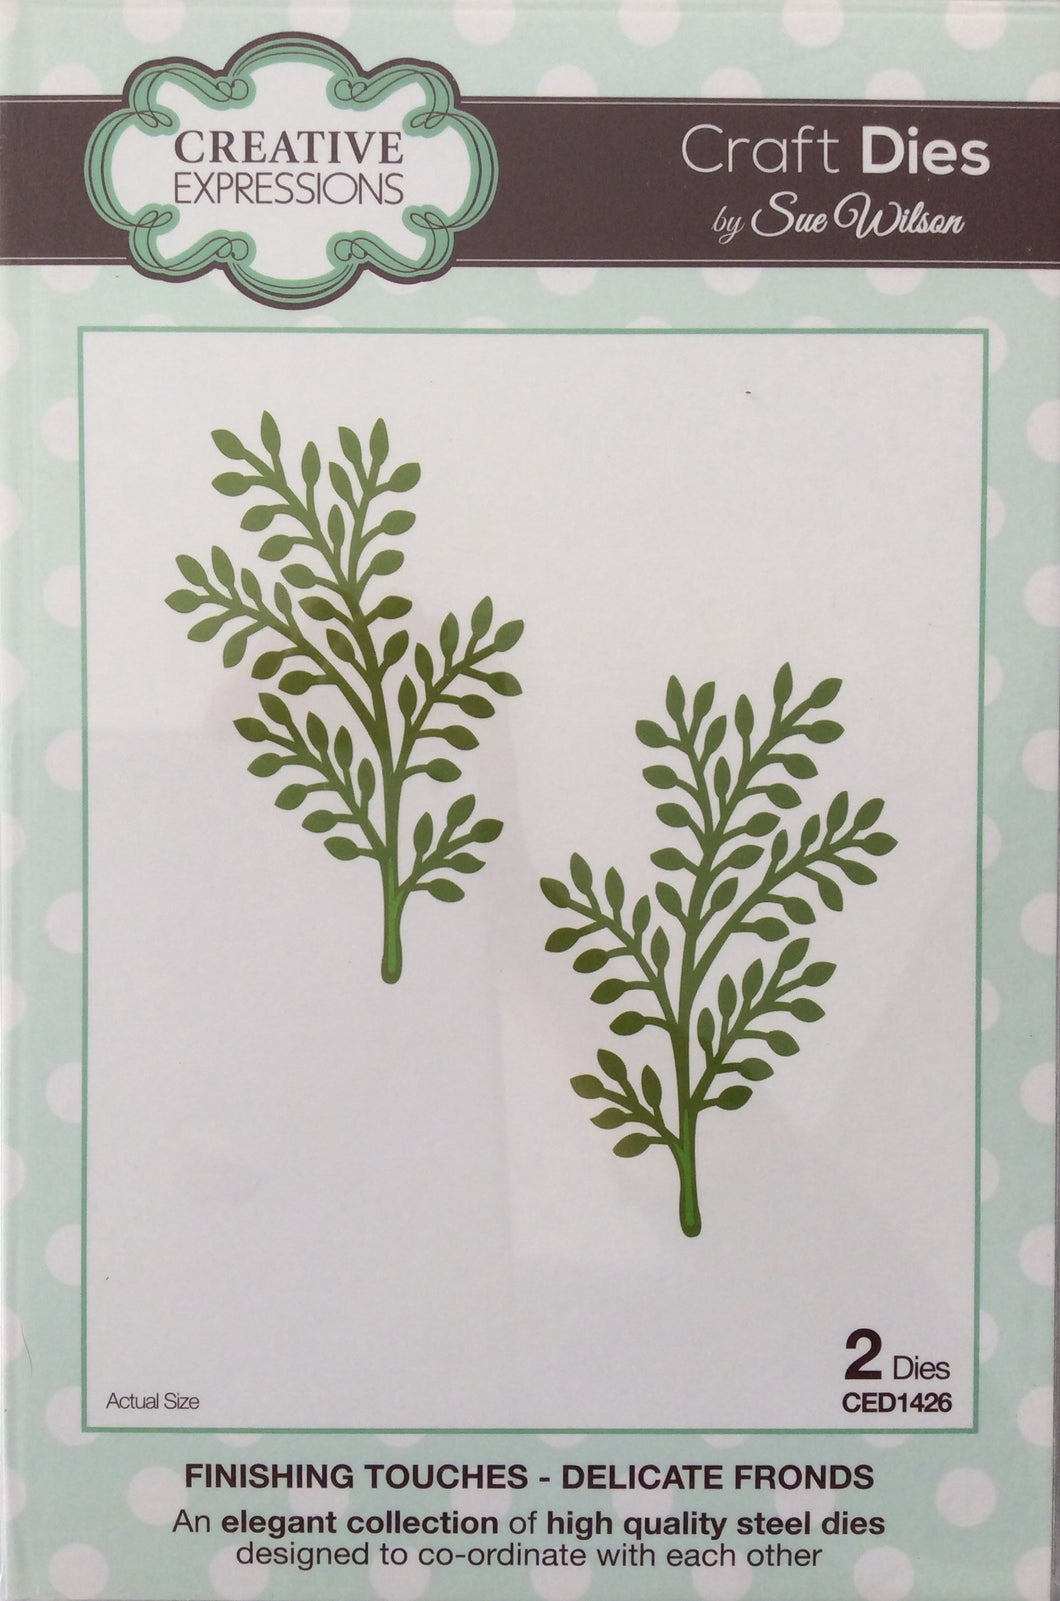 Creative Expressions Craft Dies by Sue Wilson Finishing Touches - Delicate Fronds 2 Dies